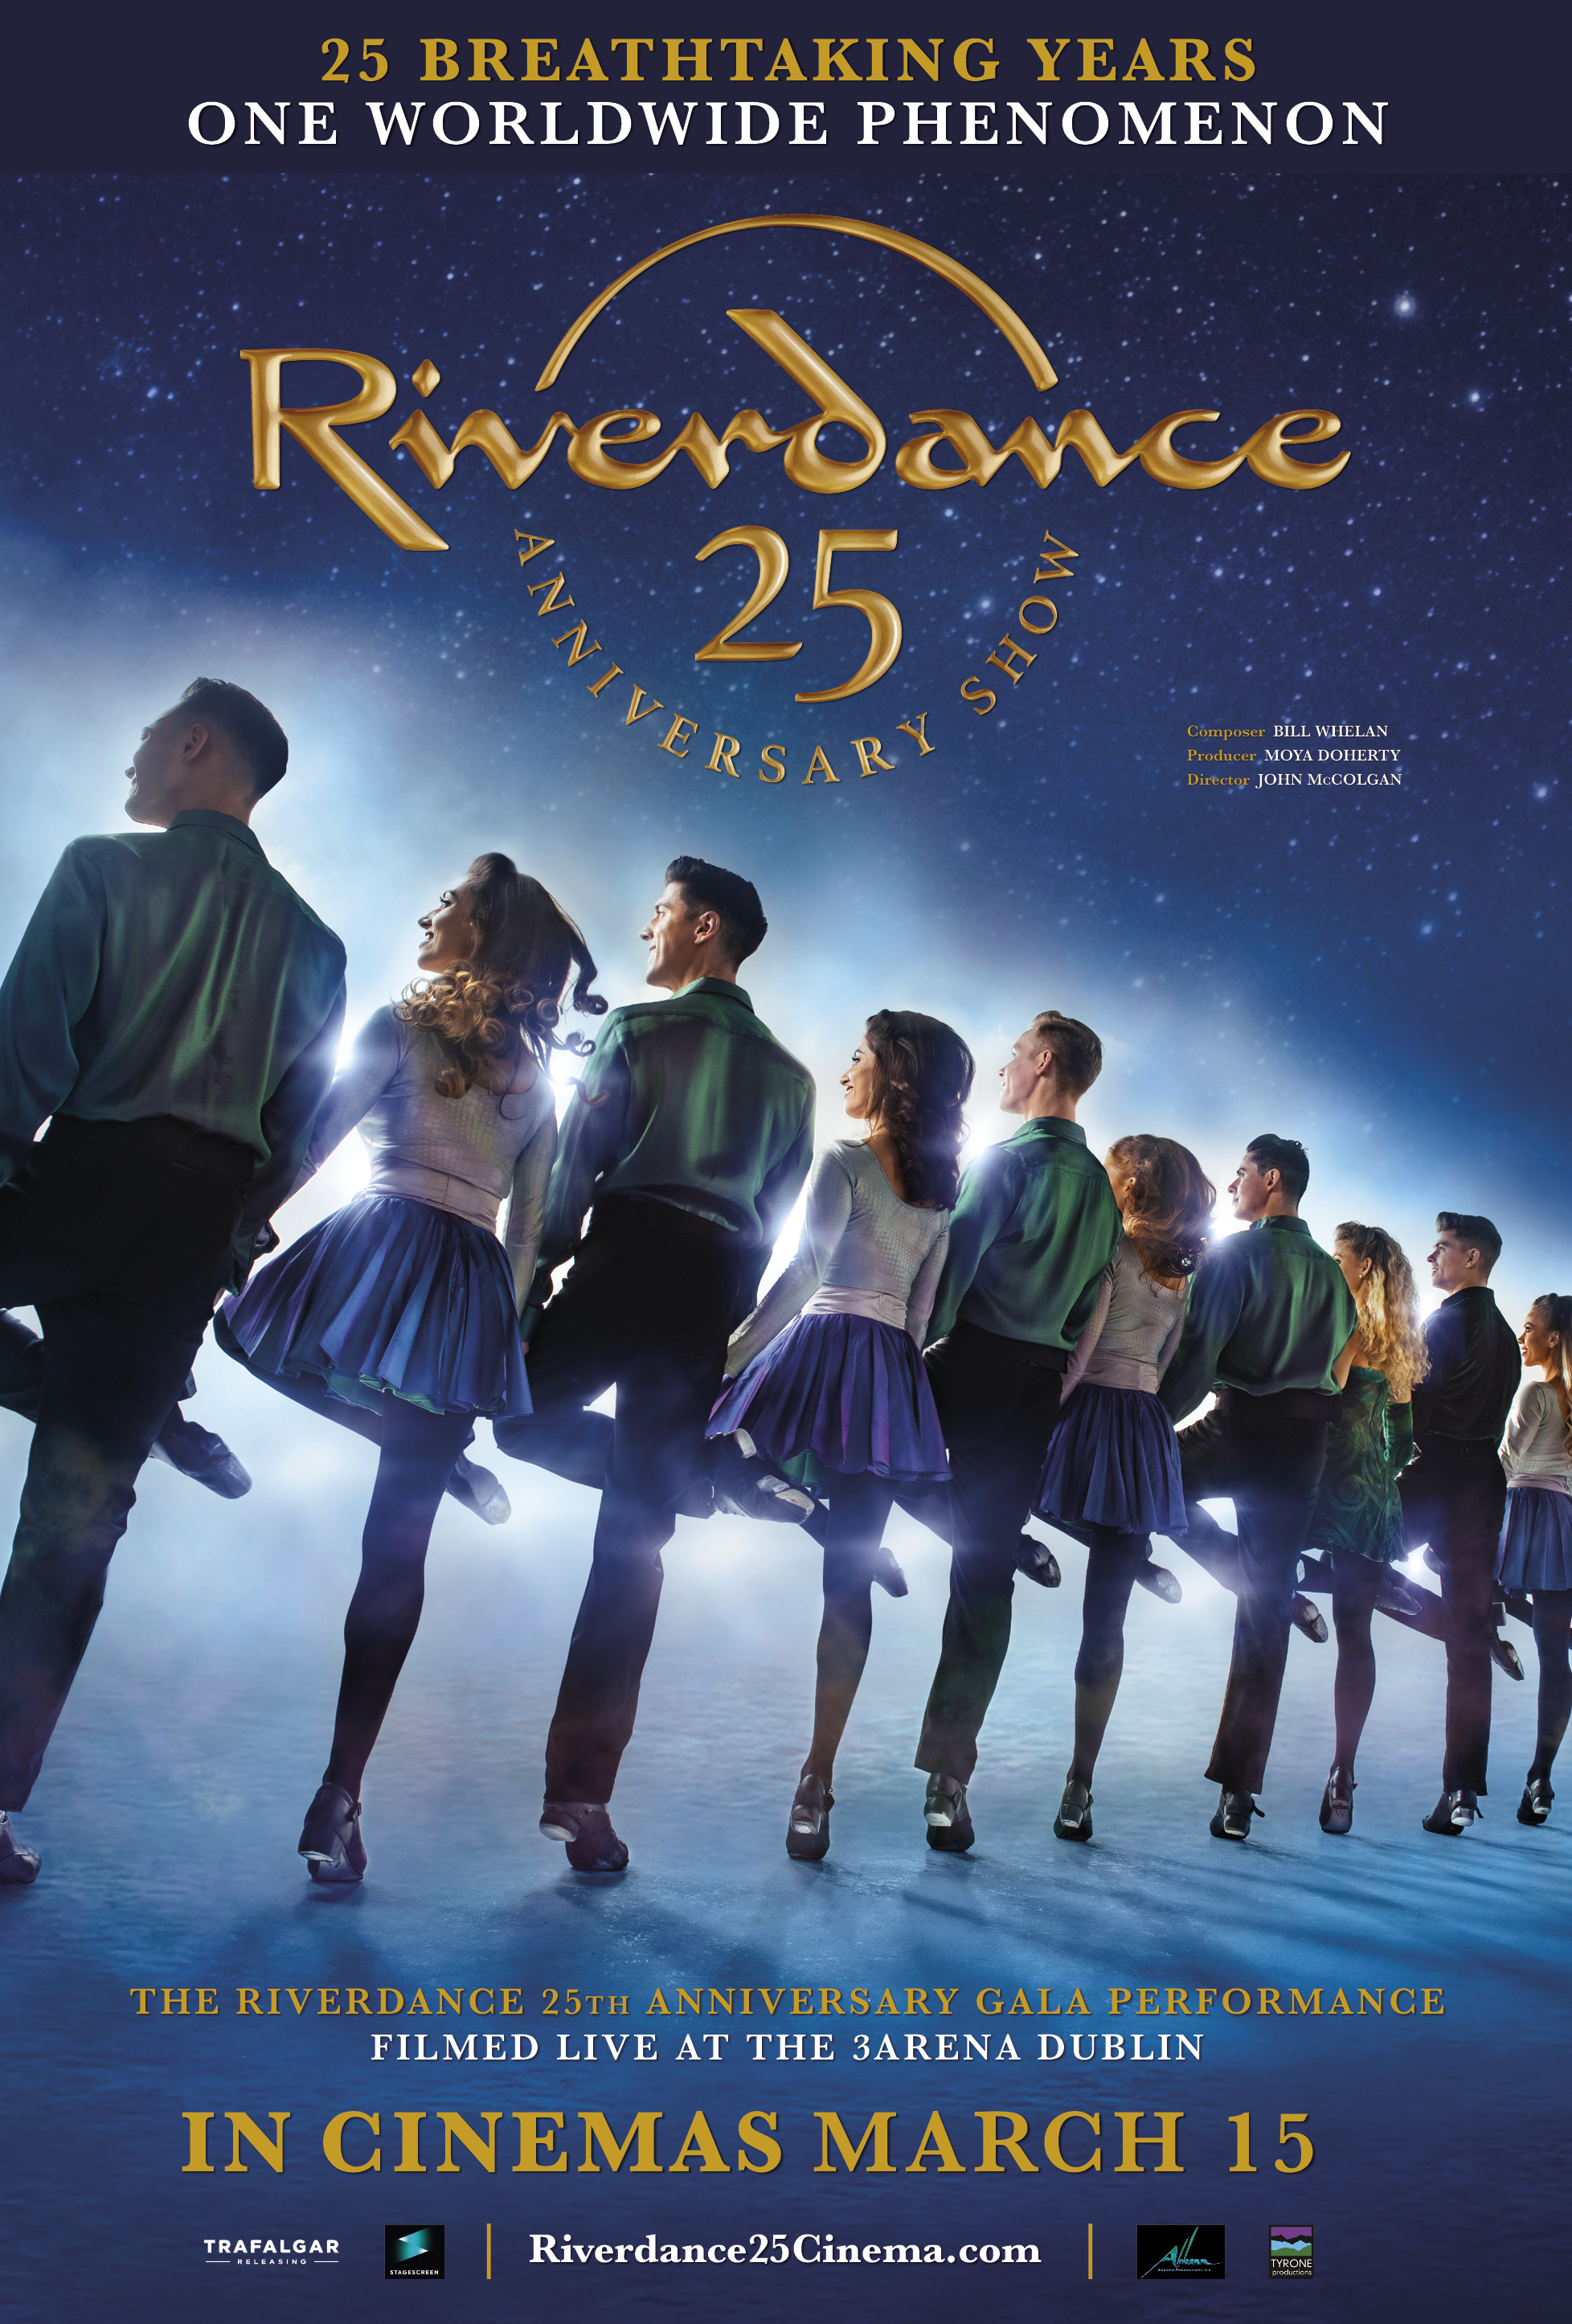 Mega Sized Movie Poster Image for Riverdance 25th Anniversary Show 